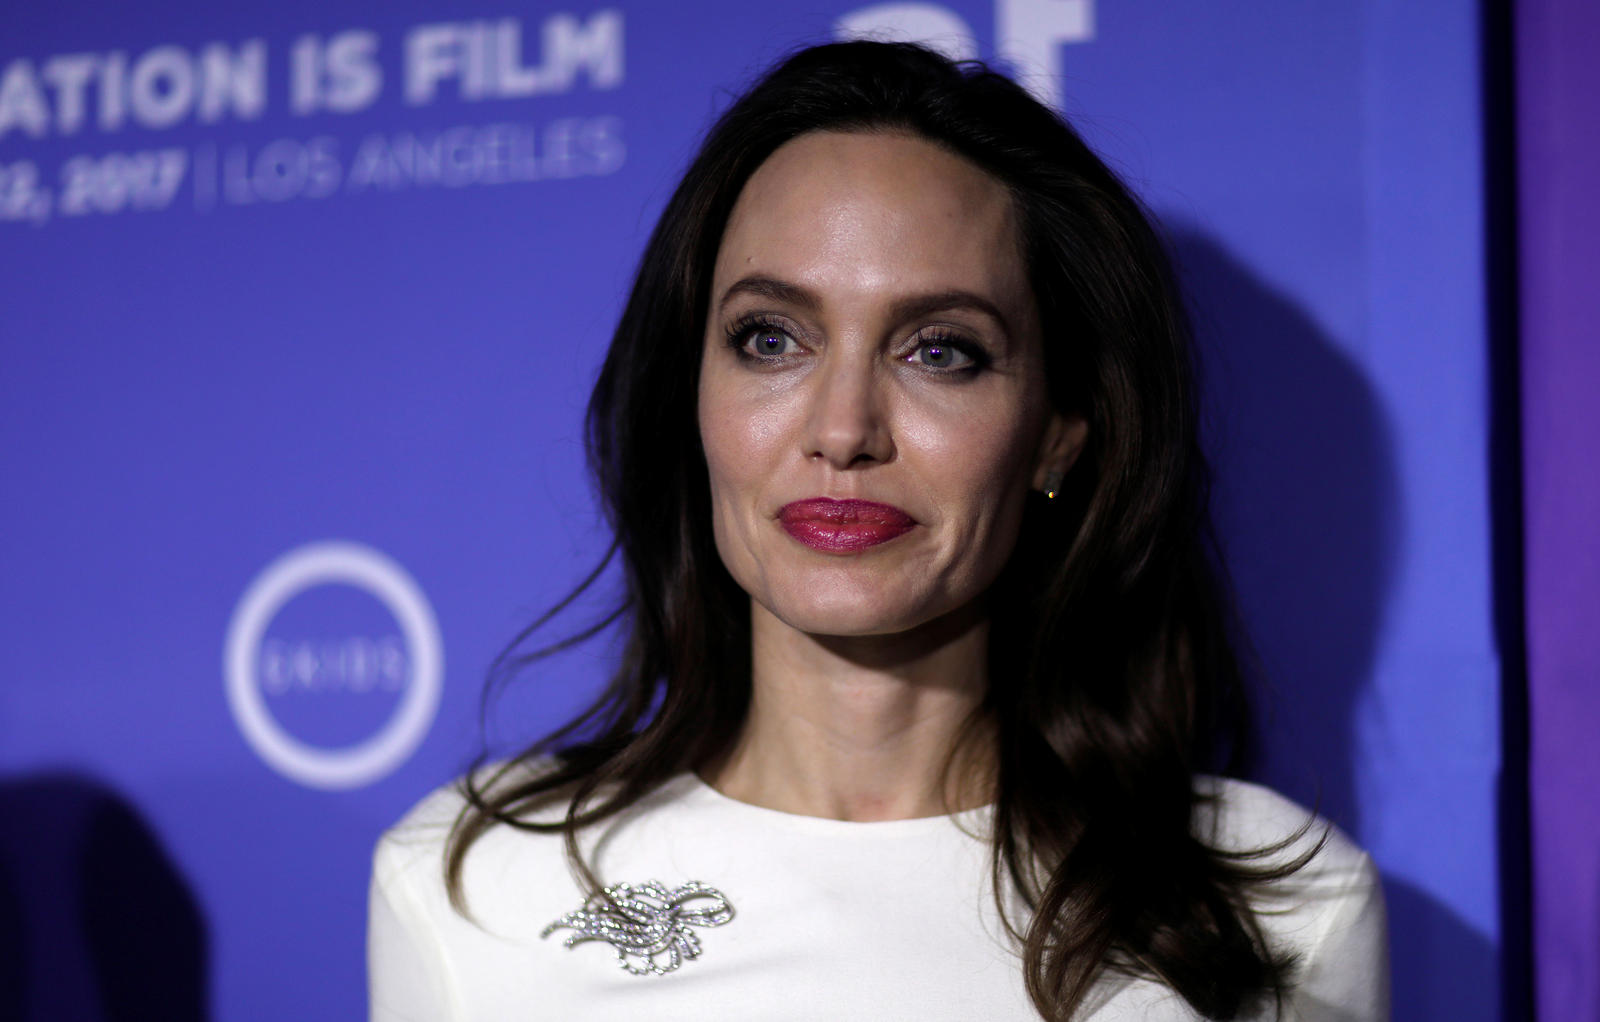 Producer Jolie poses at the premiere for 